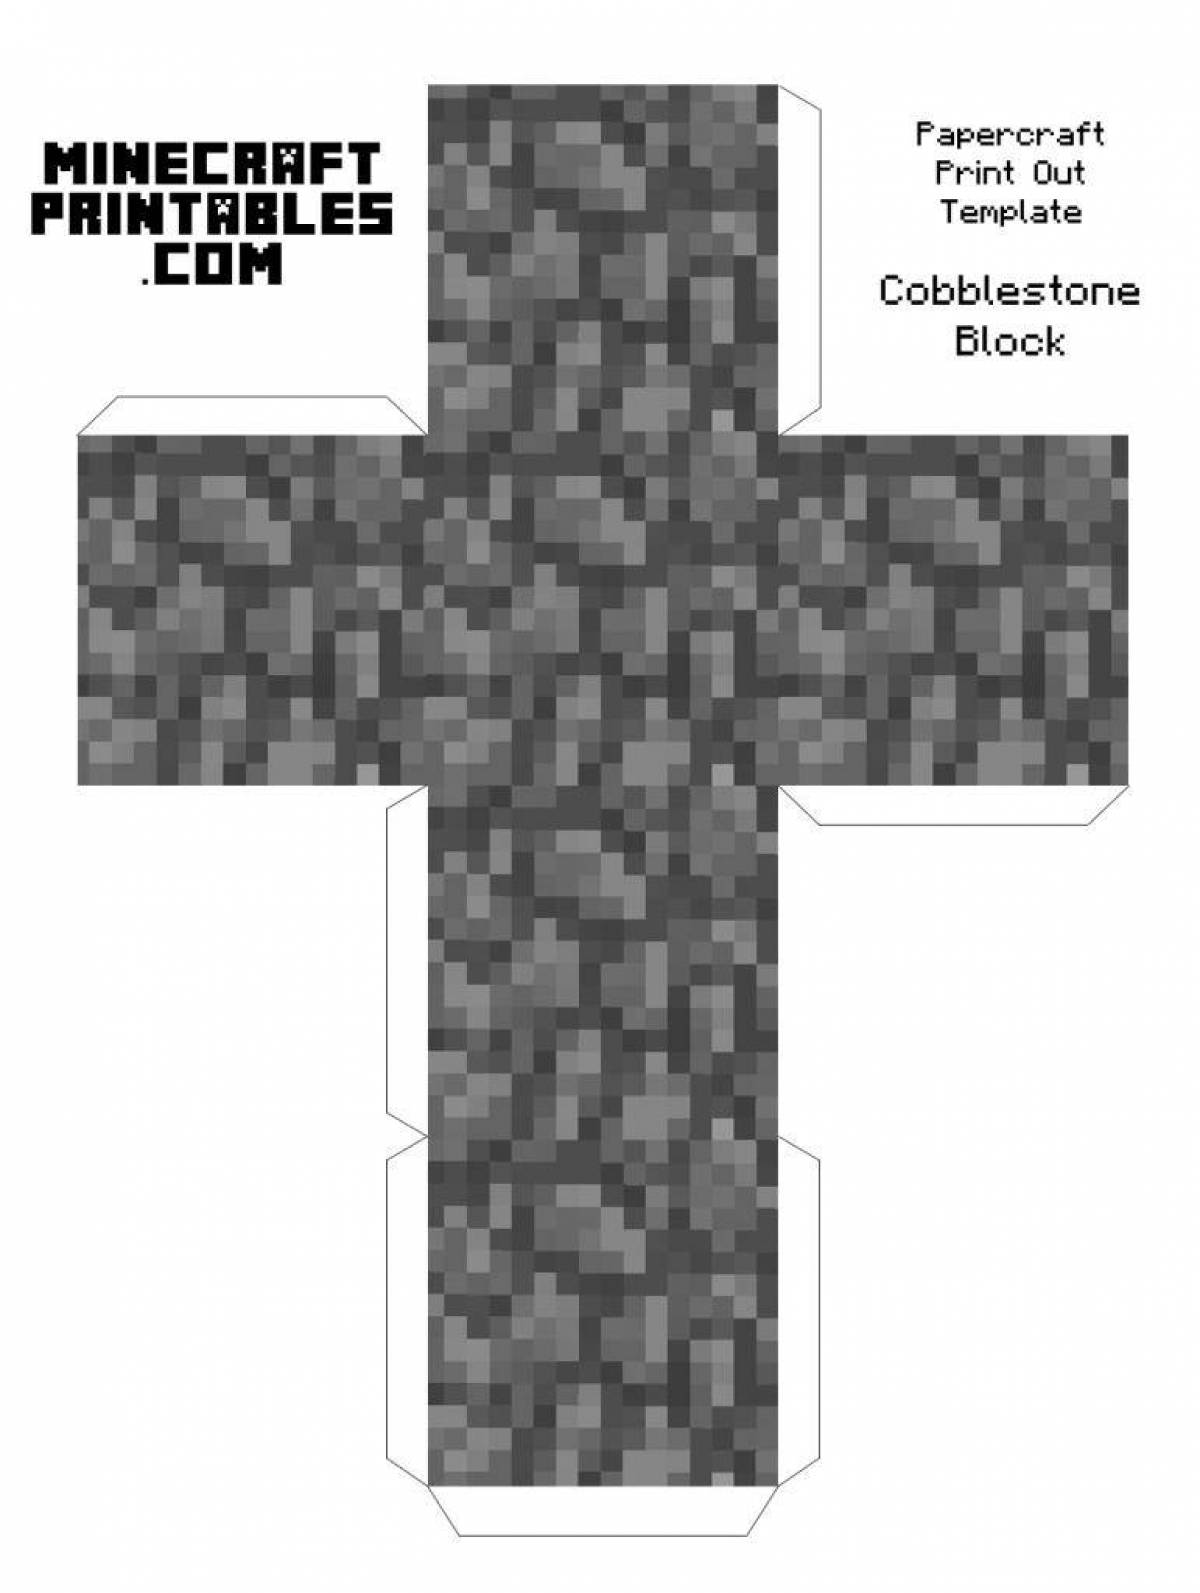 Colorful minecraft crafts coloring page